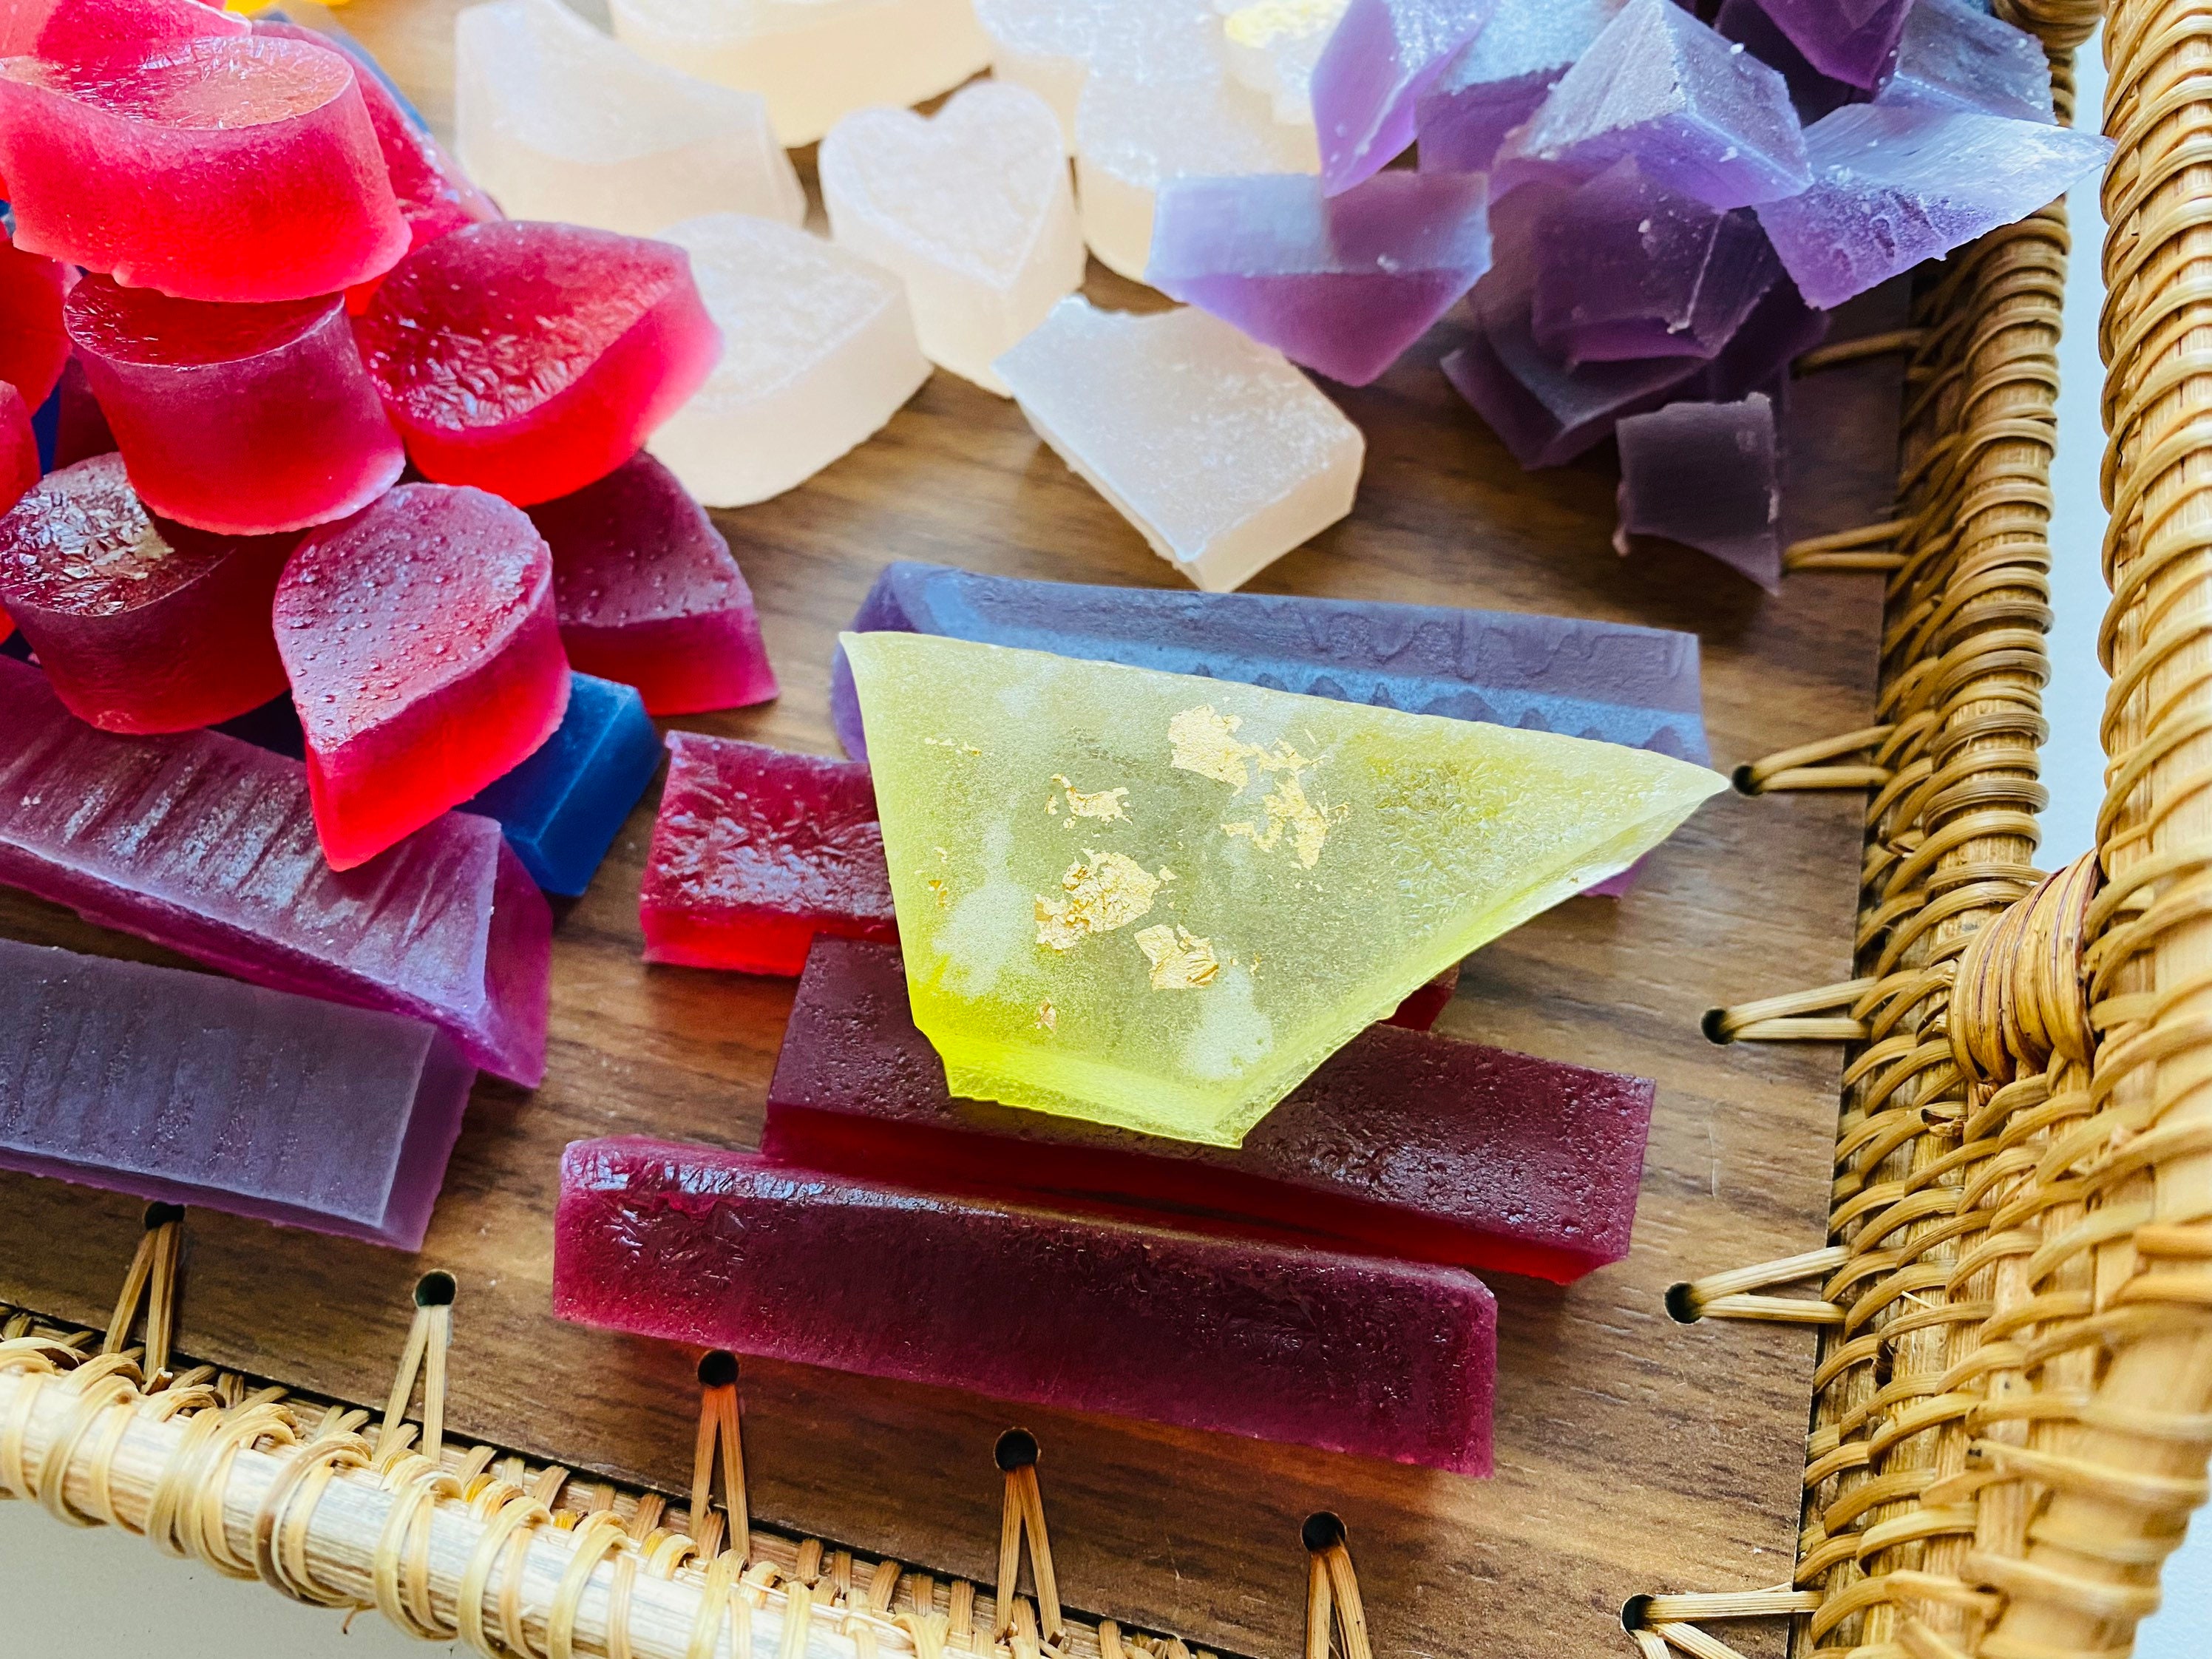  8 Flavors Box, Kohakutou Crystal Candy, All Natural  Gluten-free Vegan Candy, Edible Gemstone Crystal Jelly Candy, Edible Gems :  Grocery & Gourmet Food